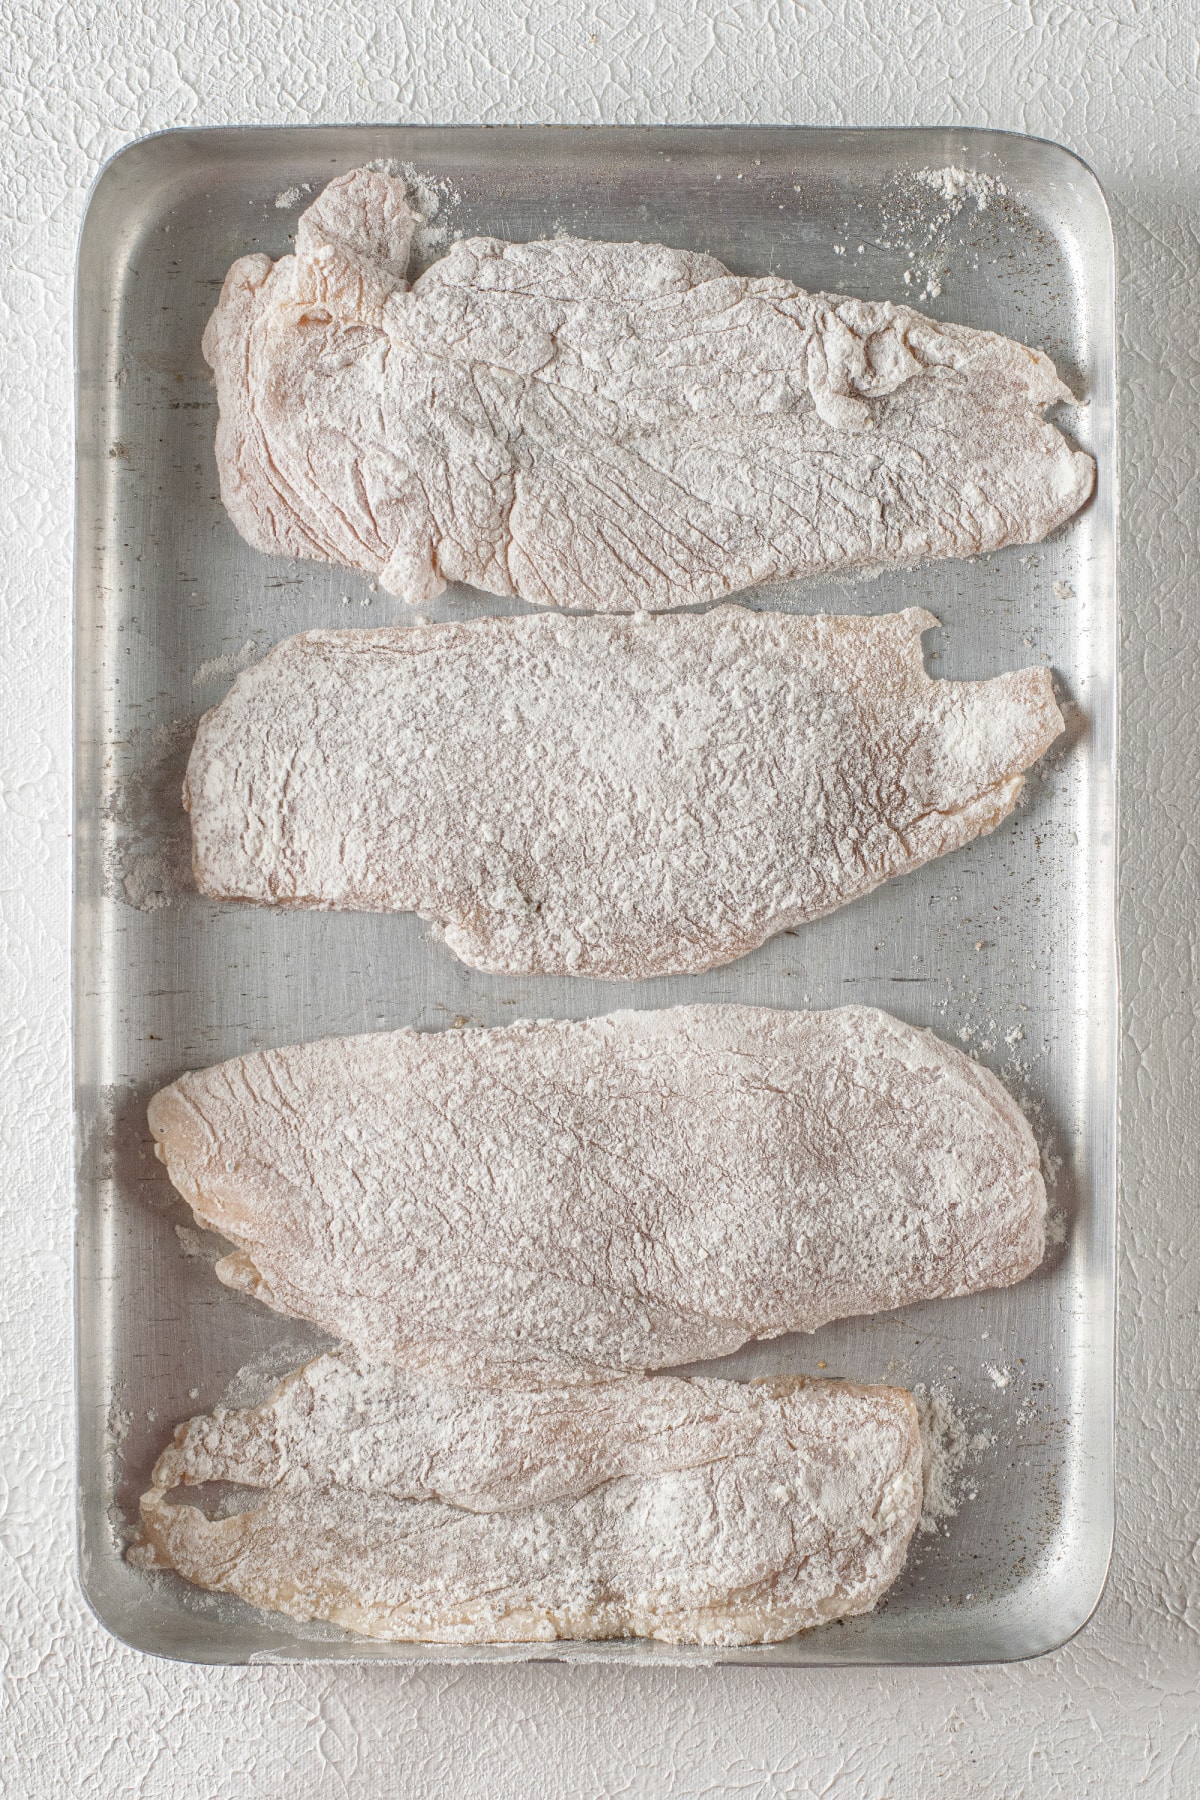 Chicken breasts coated in flour for chicken piccata recipe